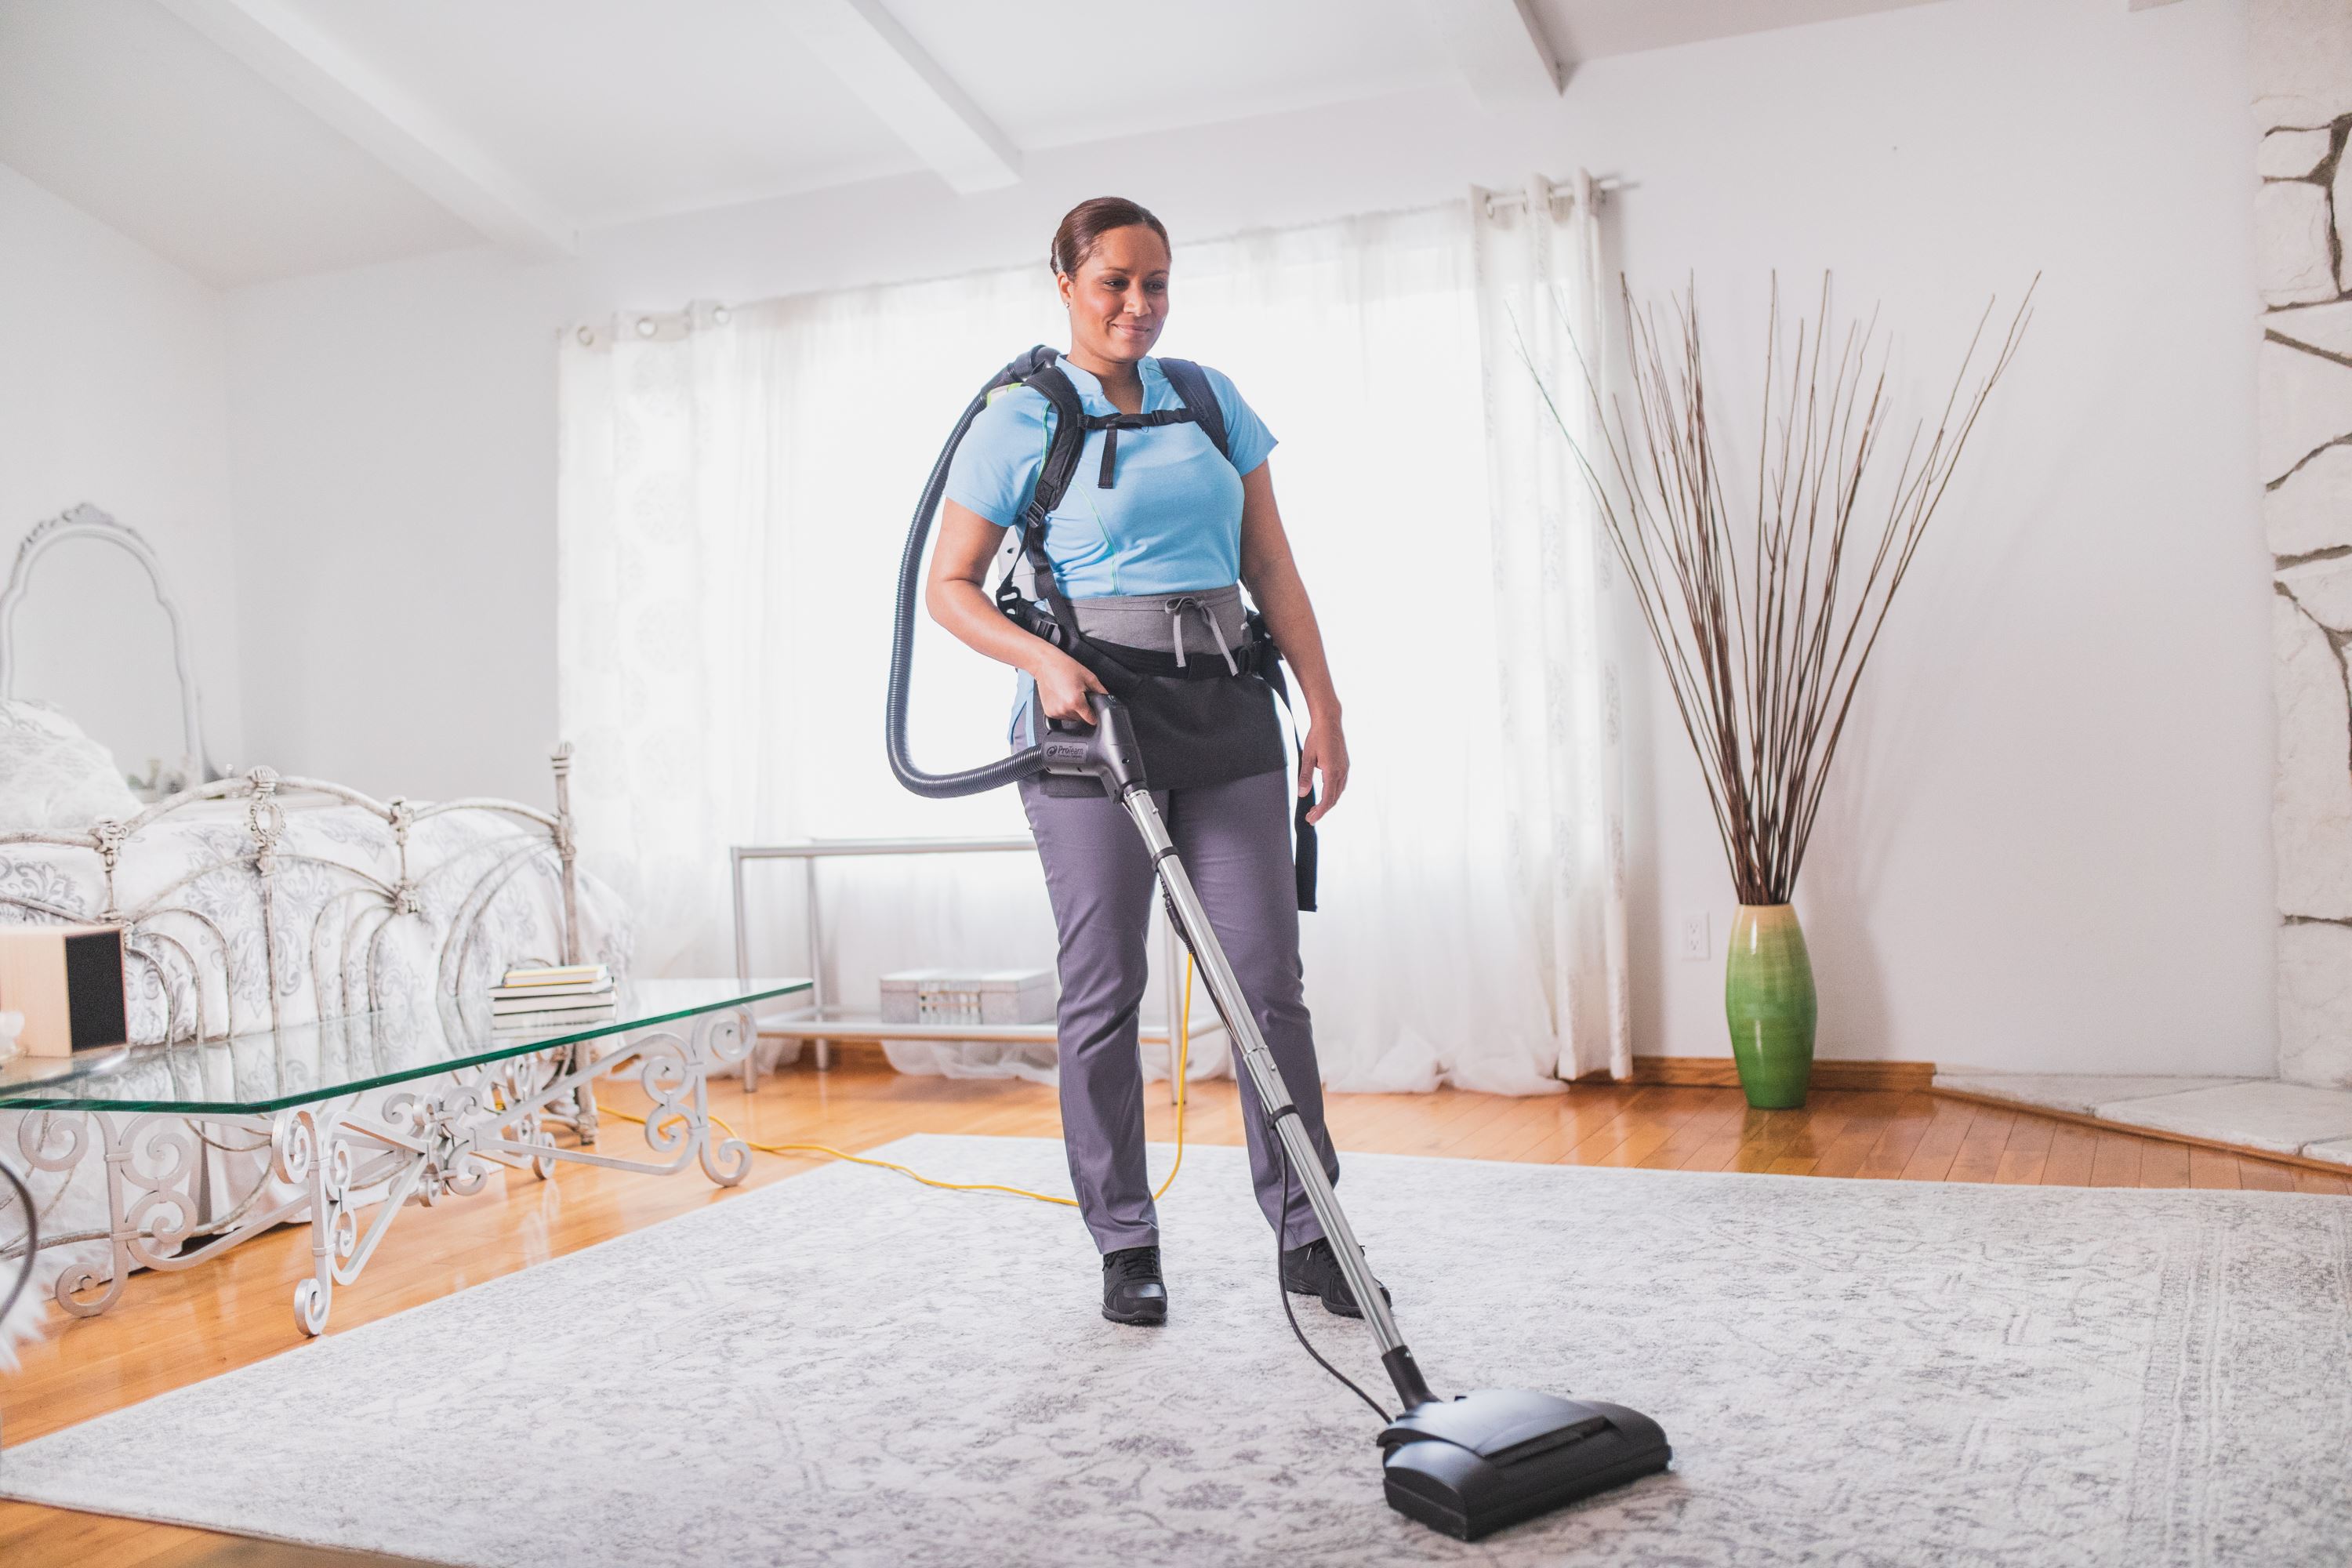 Merry Maids team member vacuuming during house cleaning